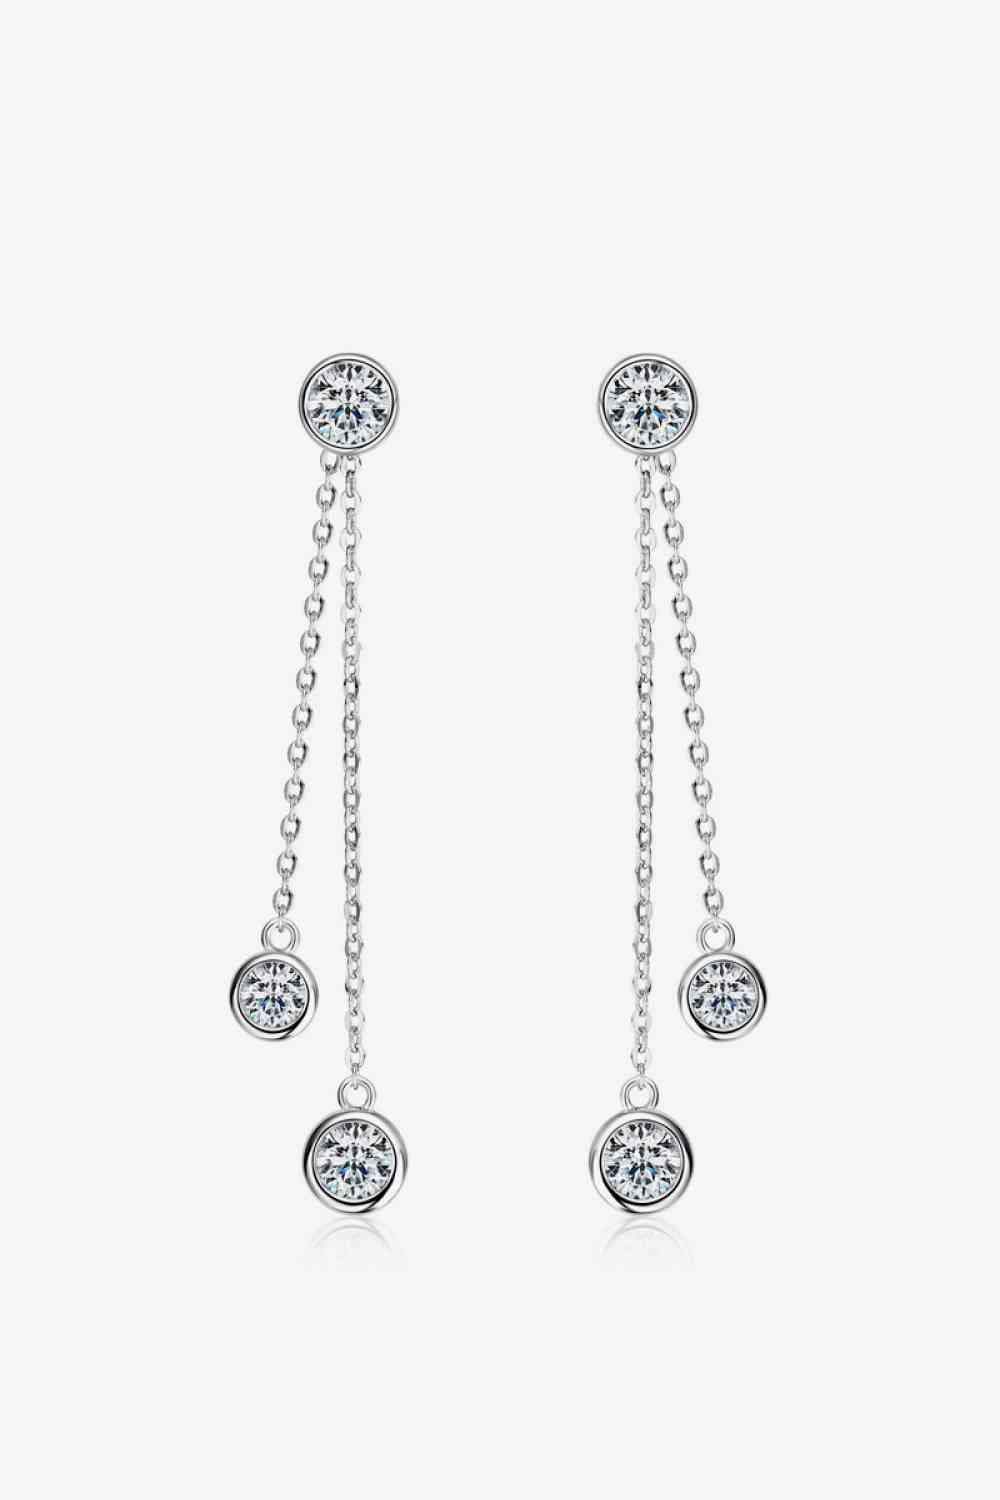 a pair of earrings with a dangling chain